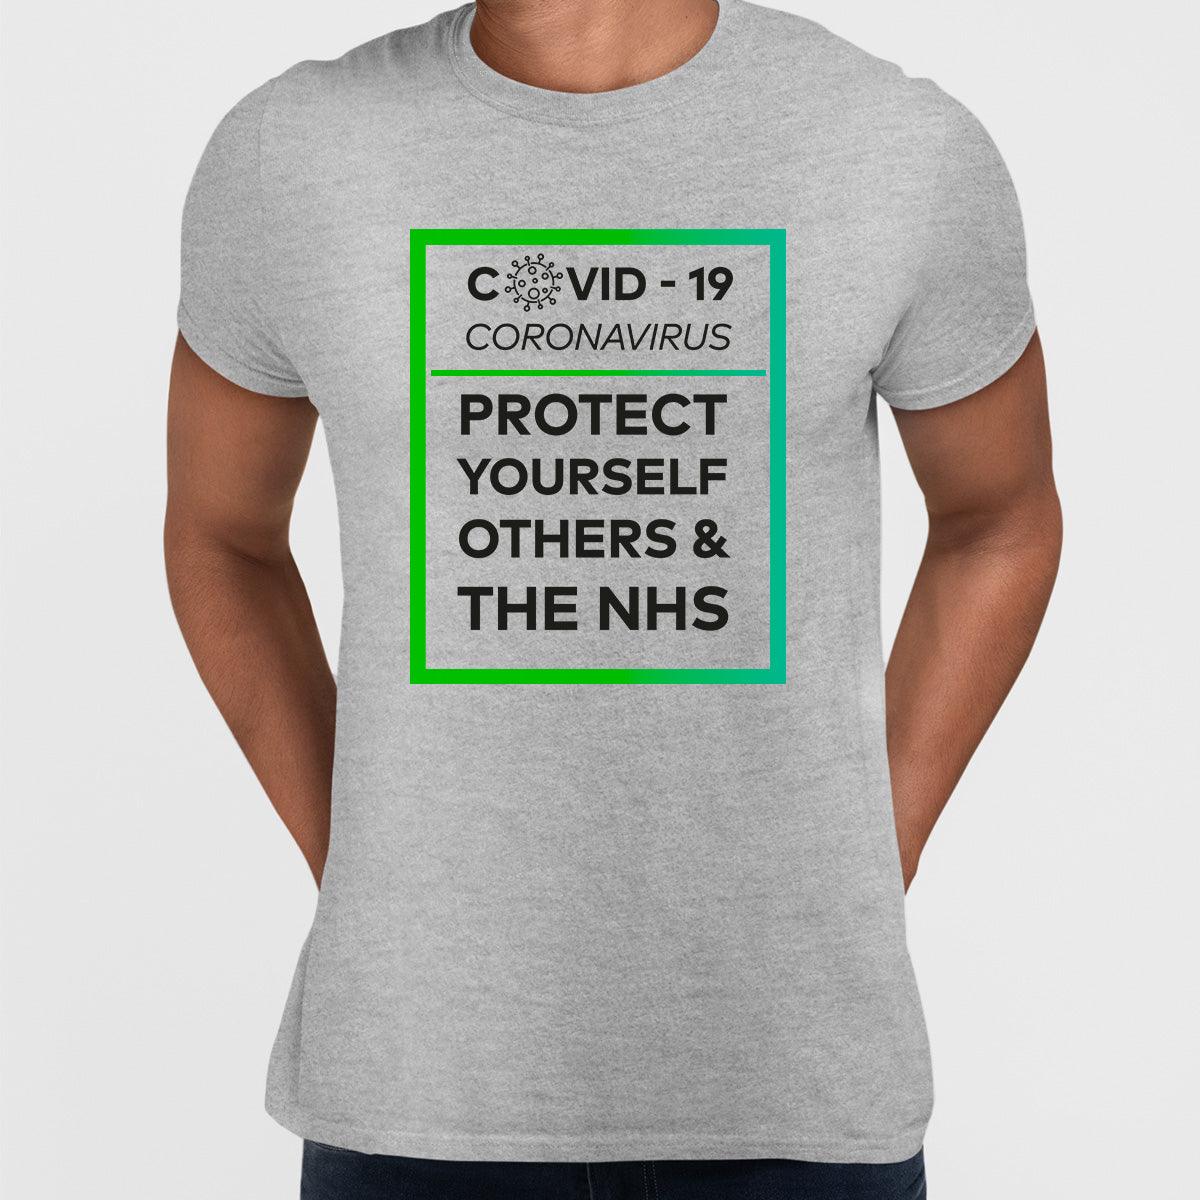 Covid19 Protect yourself others and the NHS - Black White & Black T-shirt - Kuzi Tees